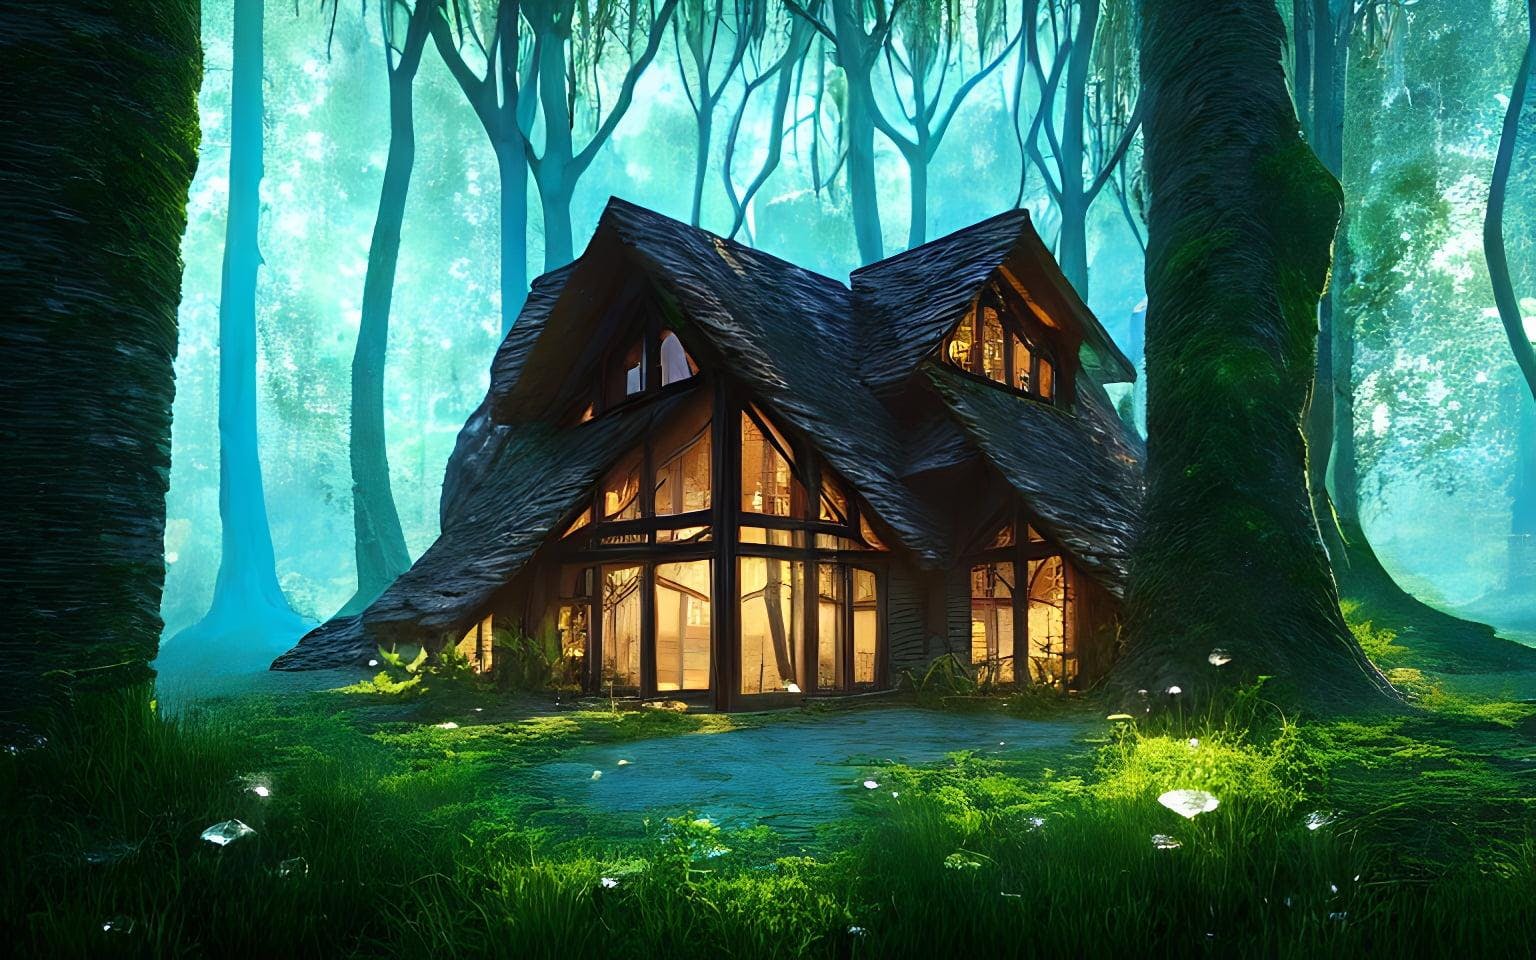 A house made of glass in a beautiful fantasy forest